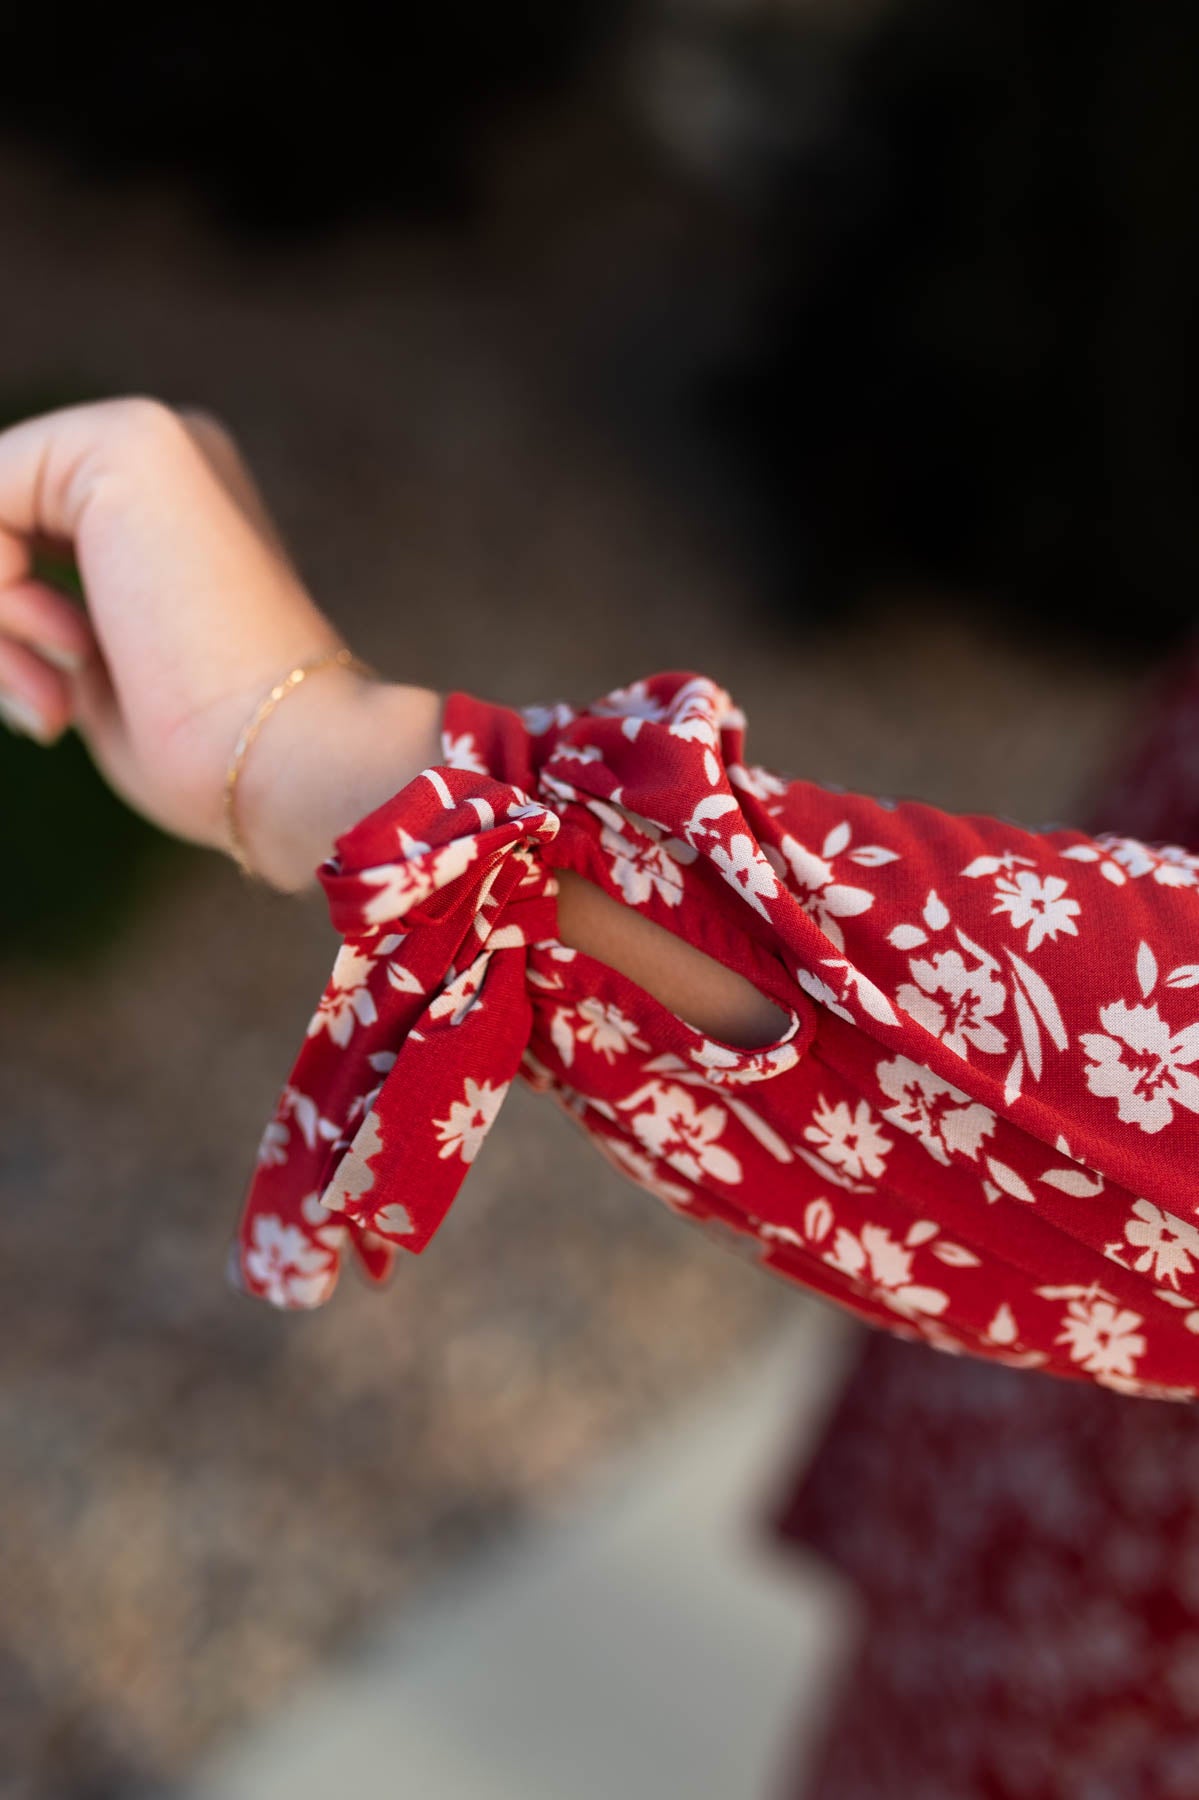 The ties on the cuff of a red floral dress